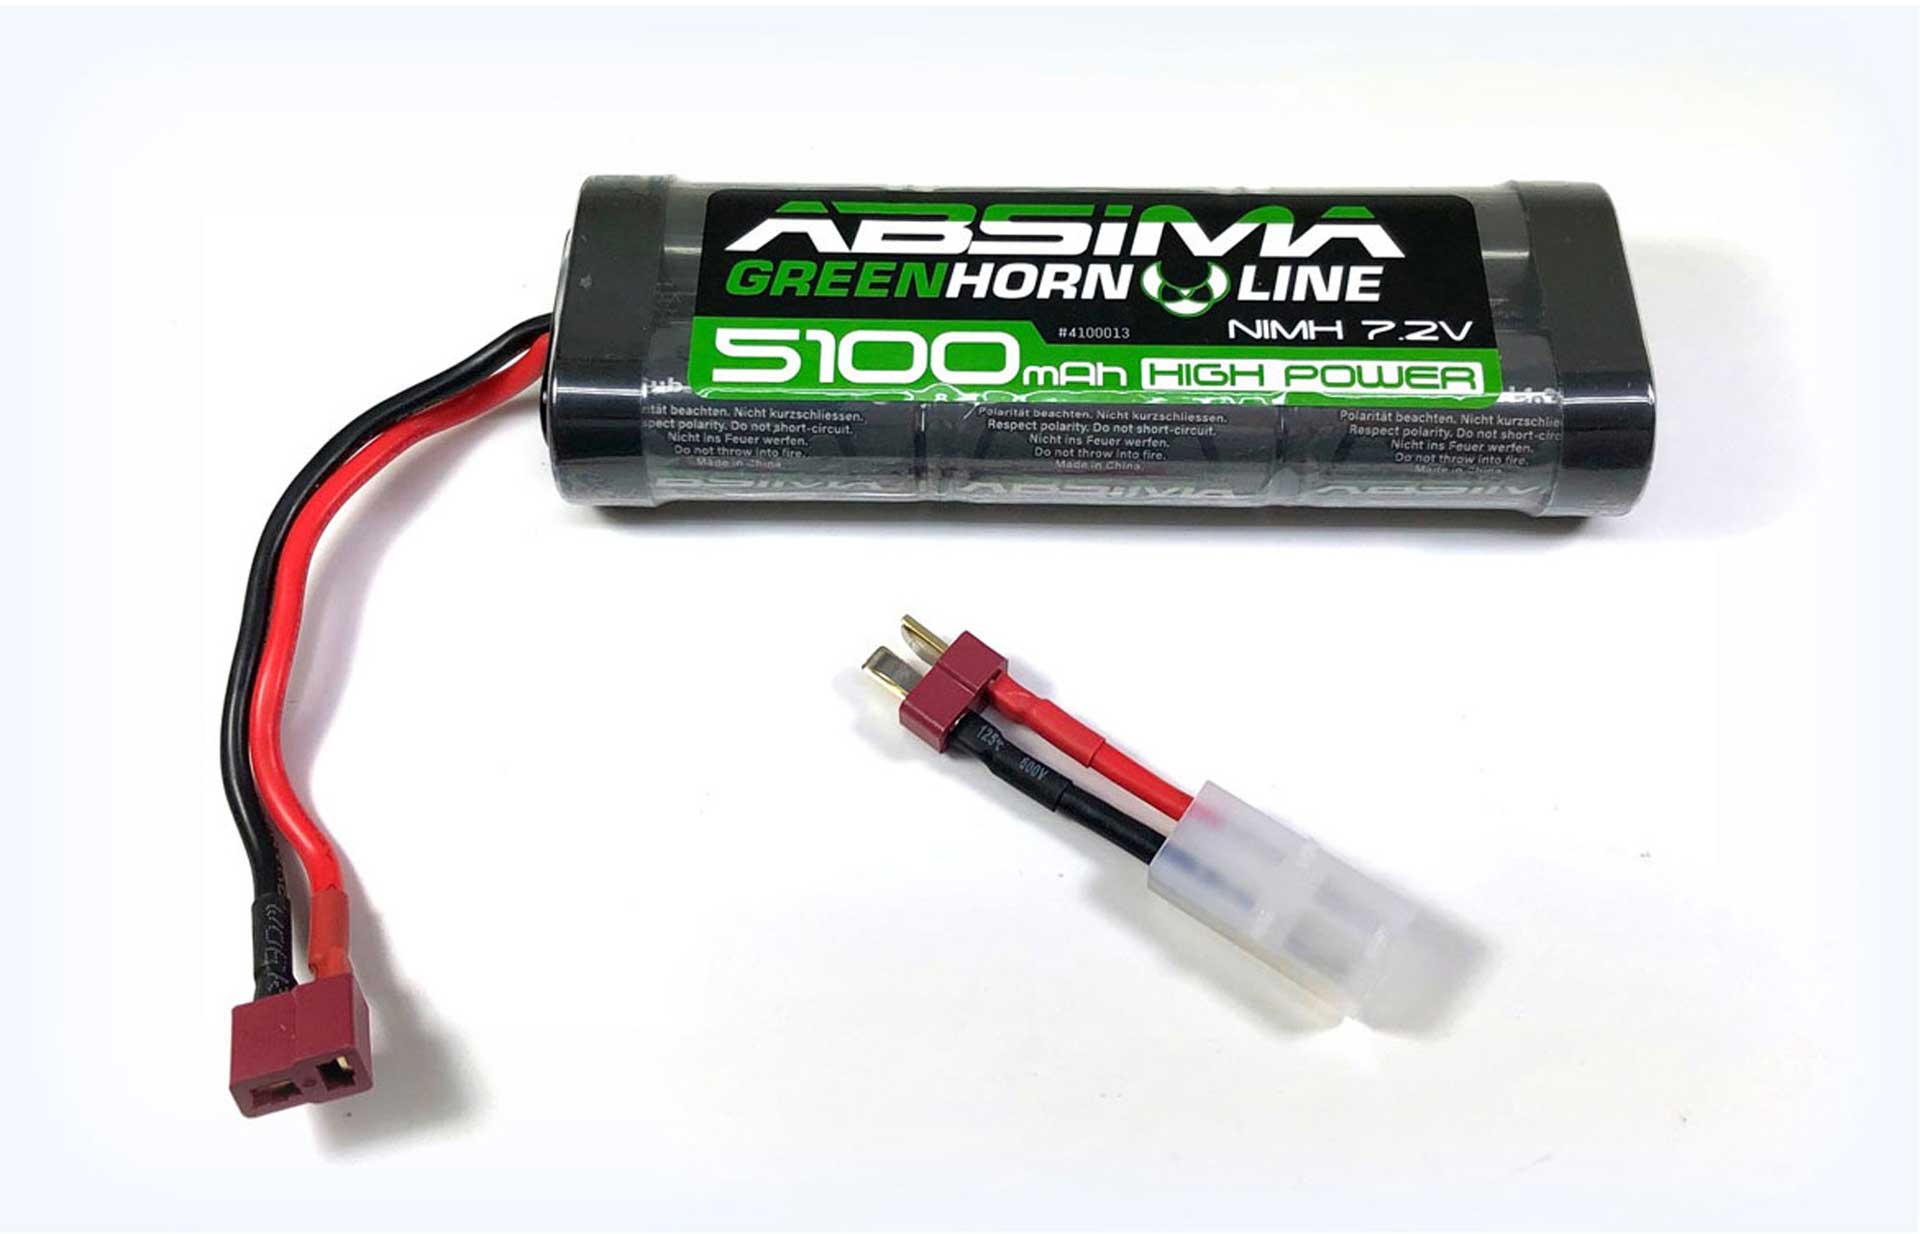 ABSIMA GREENHORN NIMH STICK PACK 7.2V 5100MAH BATTERY WITH T-PLUG CONNECTOR + TAMIYA ADAPTER